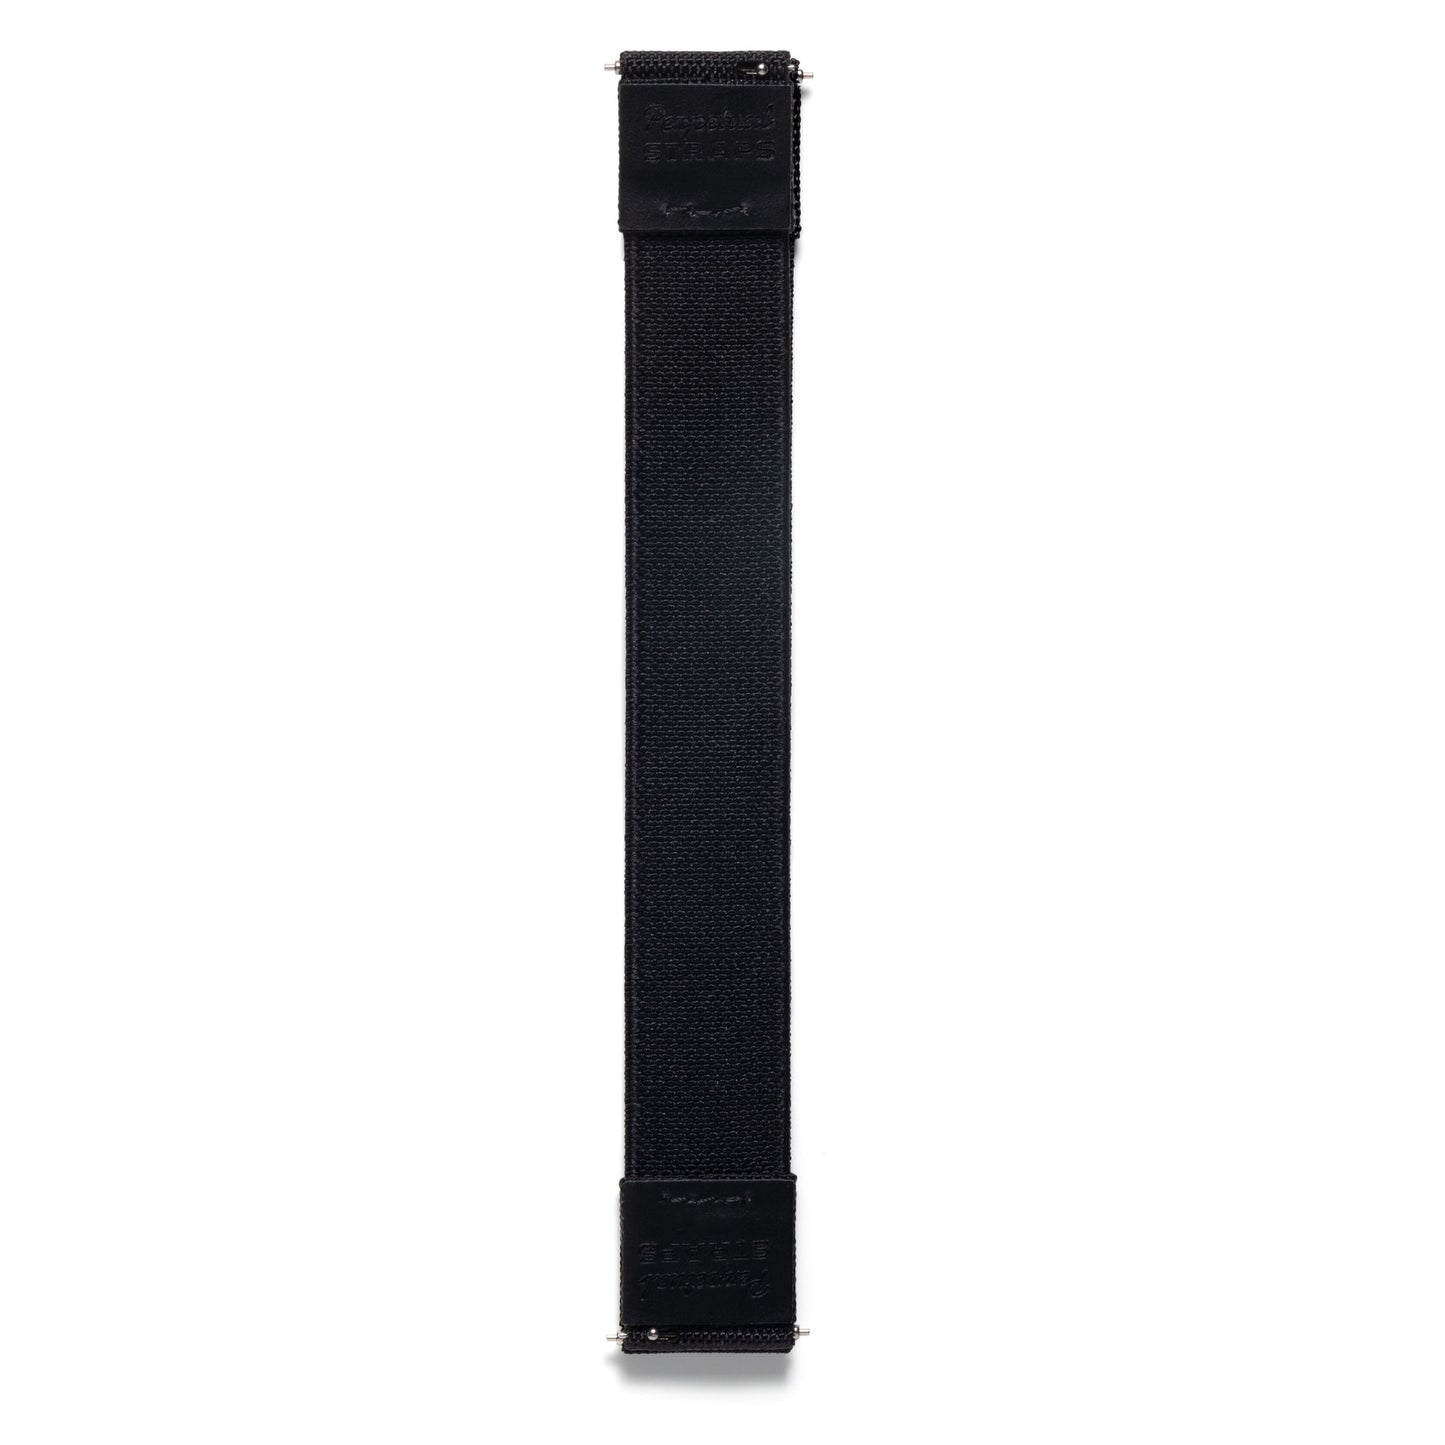 BLACK ELASTIC - PREMIUM FABRIC HYBRID WATCH STRAP for MOST WATCHES WITH A 20MM LUG WIDTH